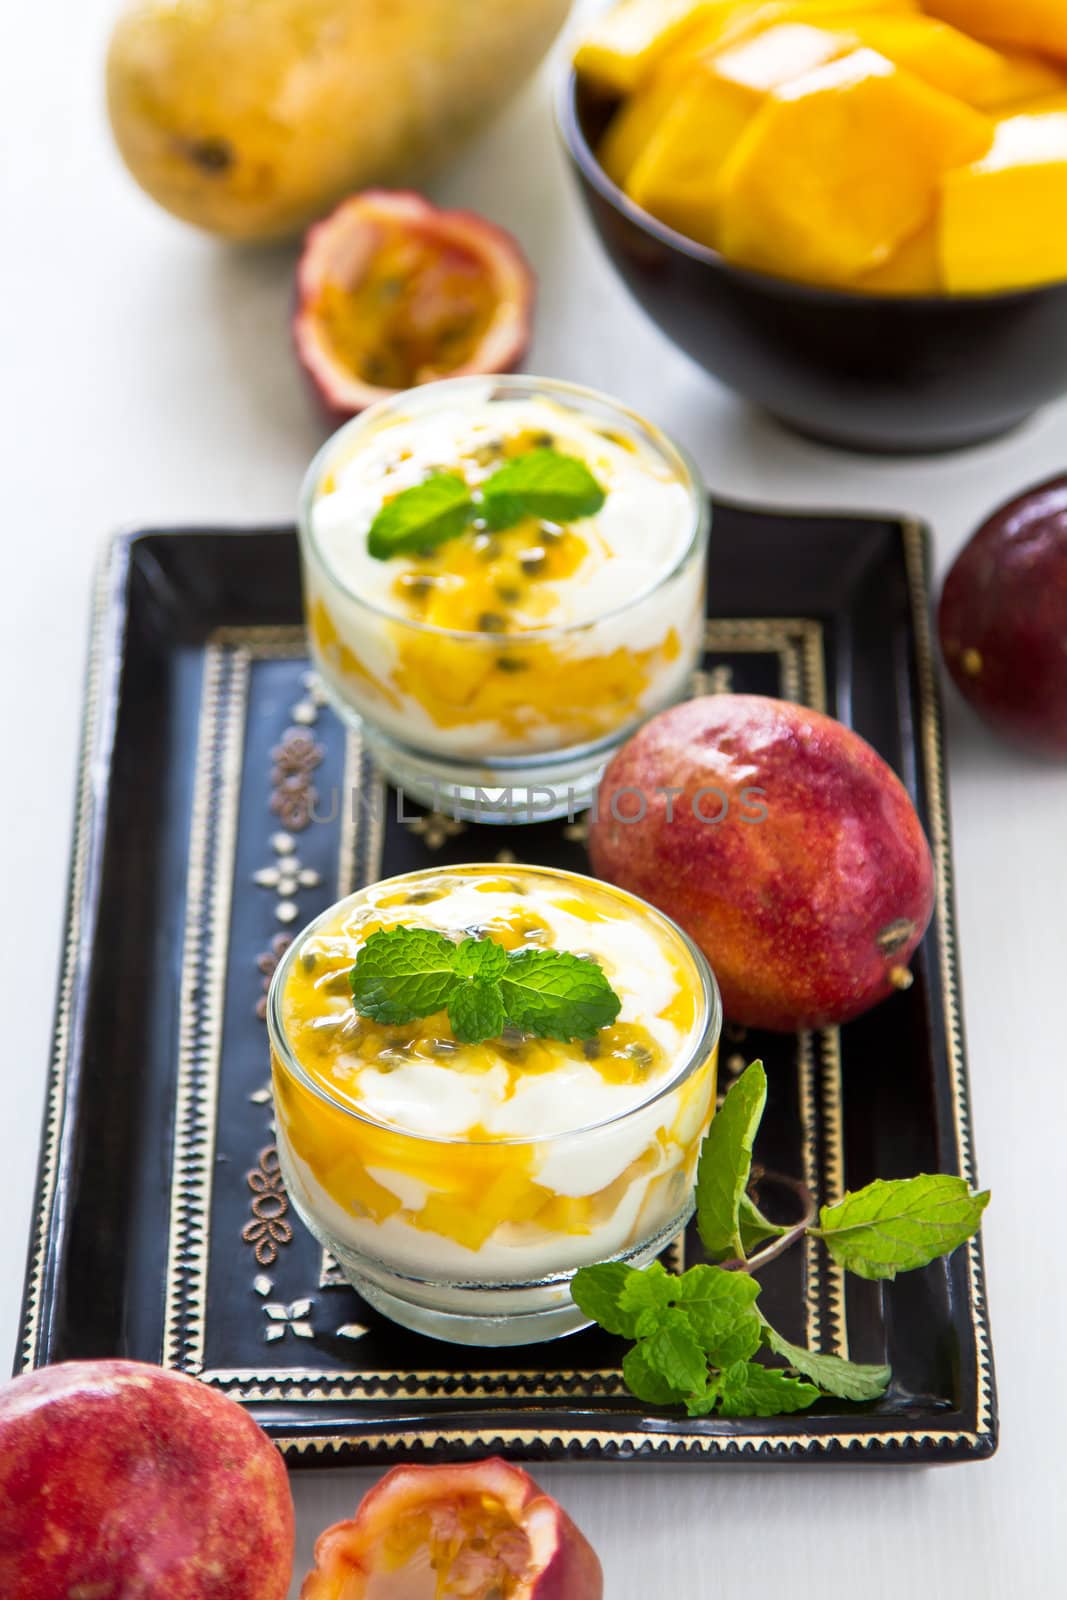 Passion fruit and Mango with yogurt by vanillaechoes